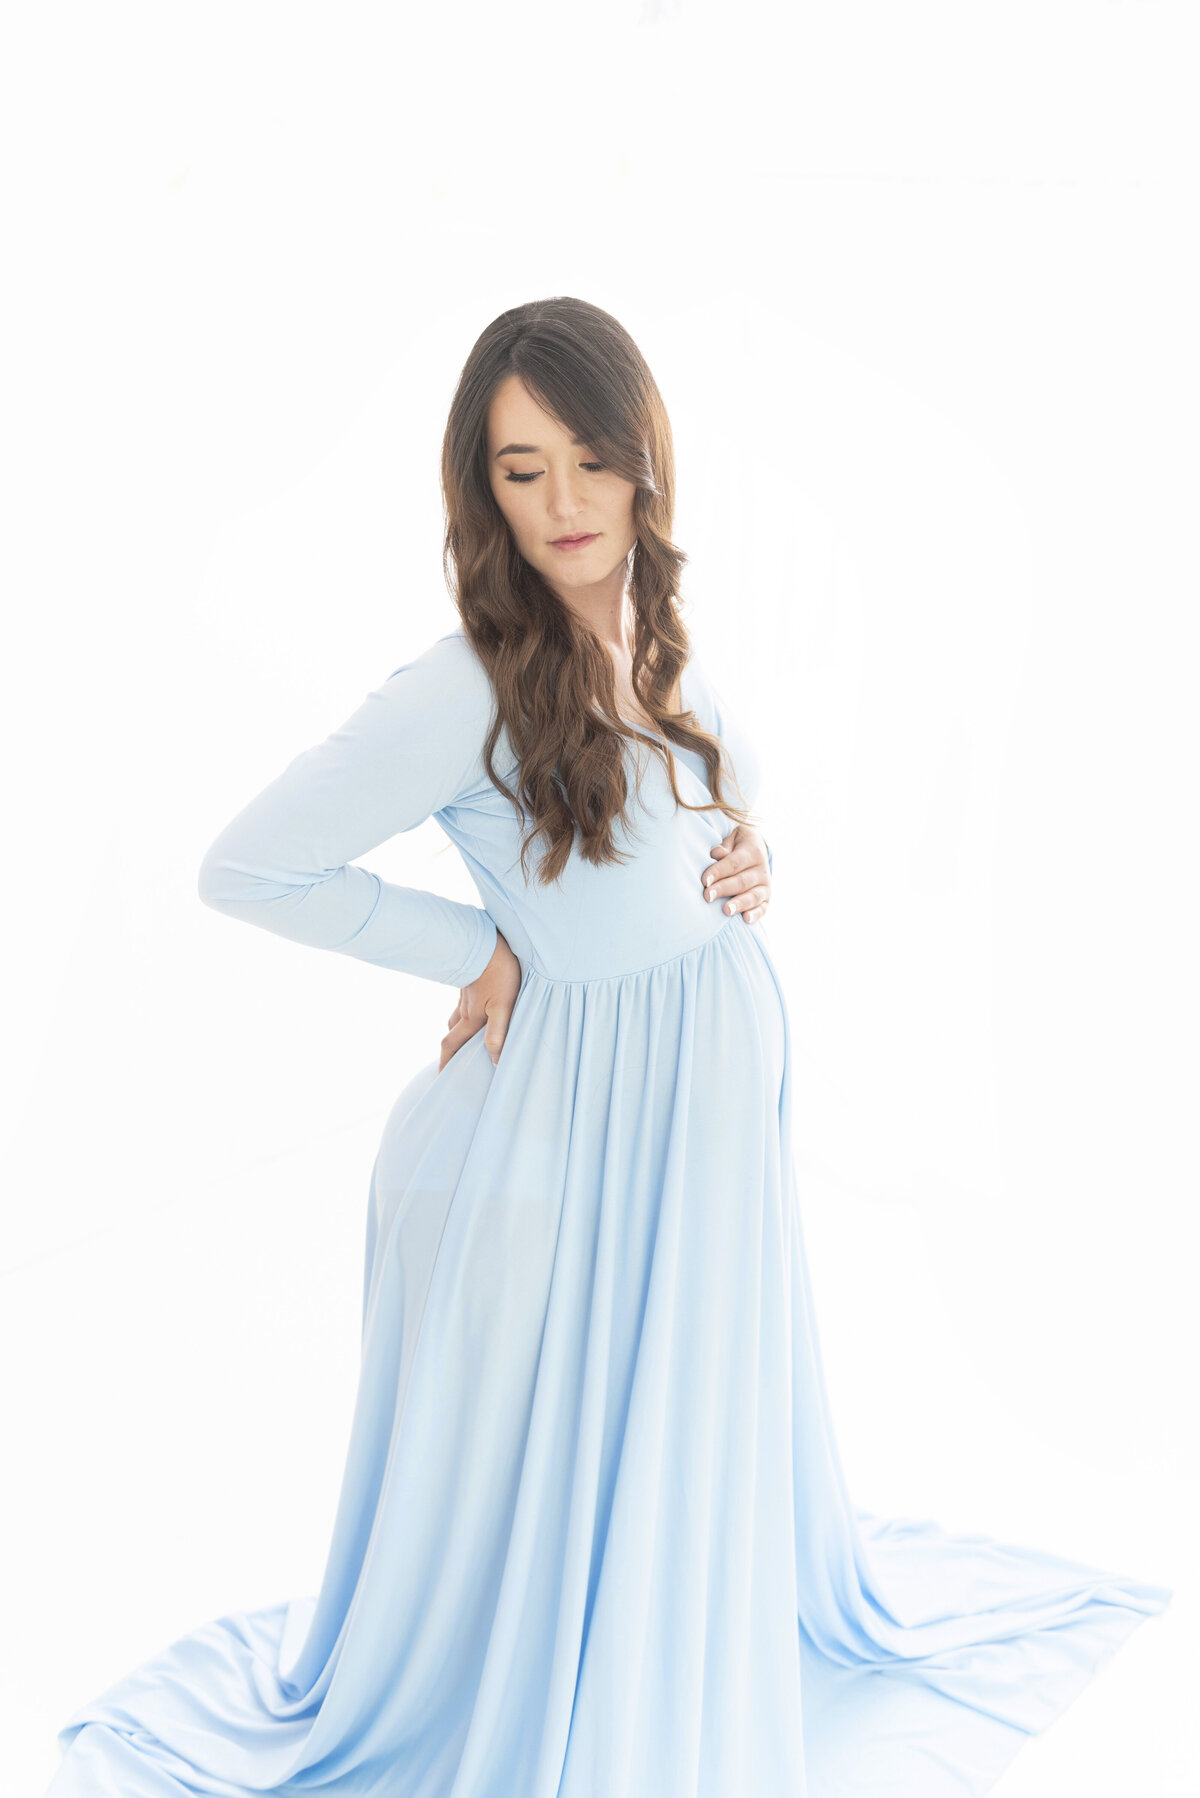 A pregnant woman stands in a studio gazing down her shoulder in a blue maternity gown